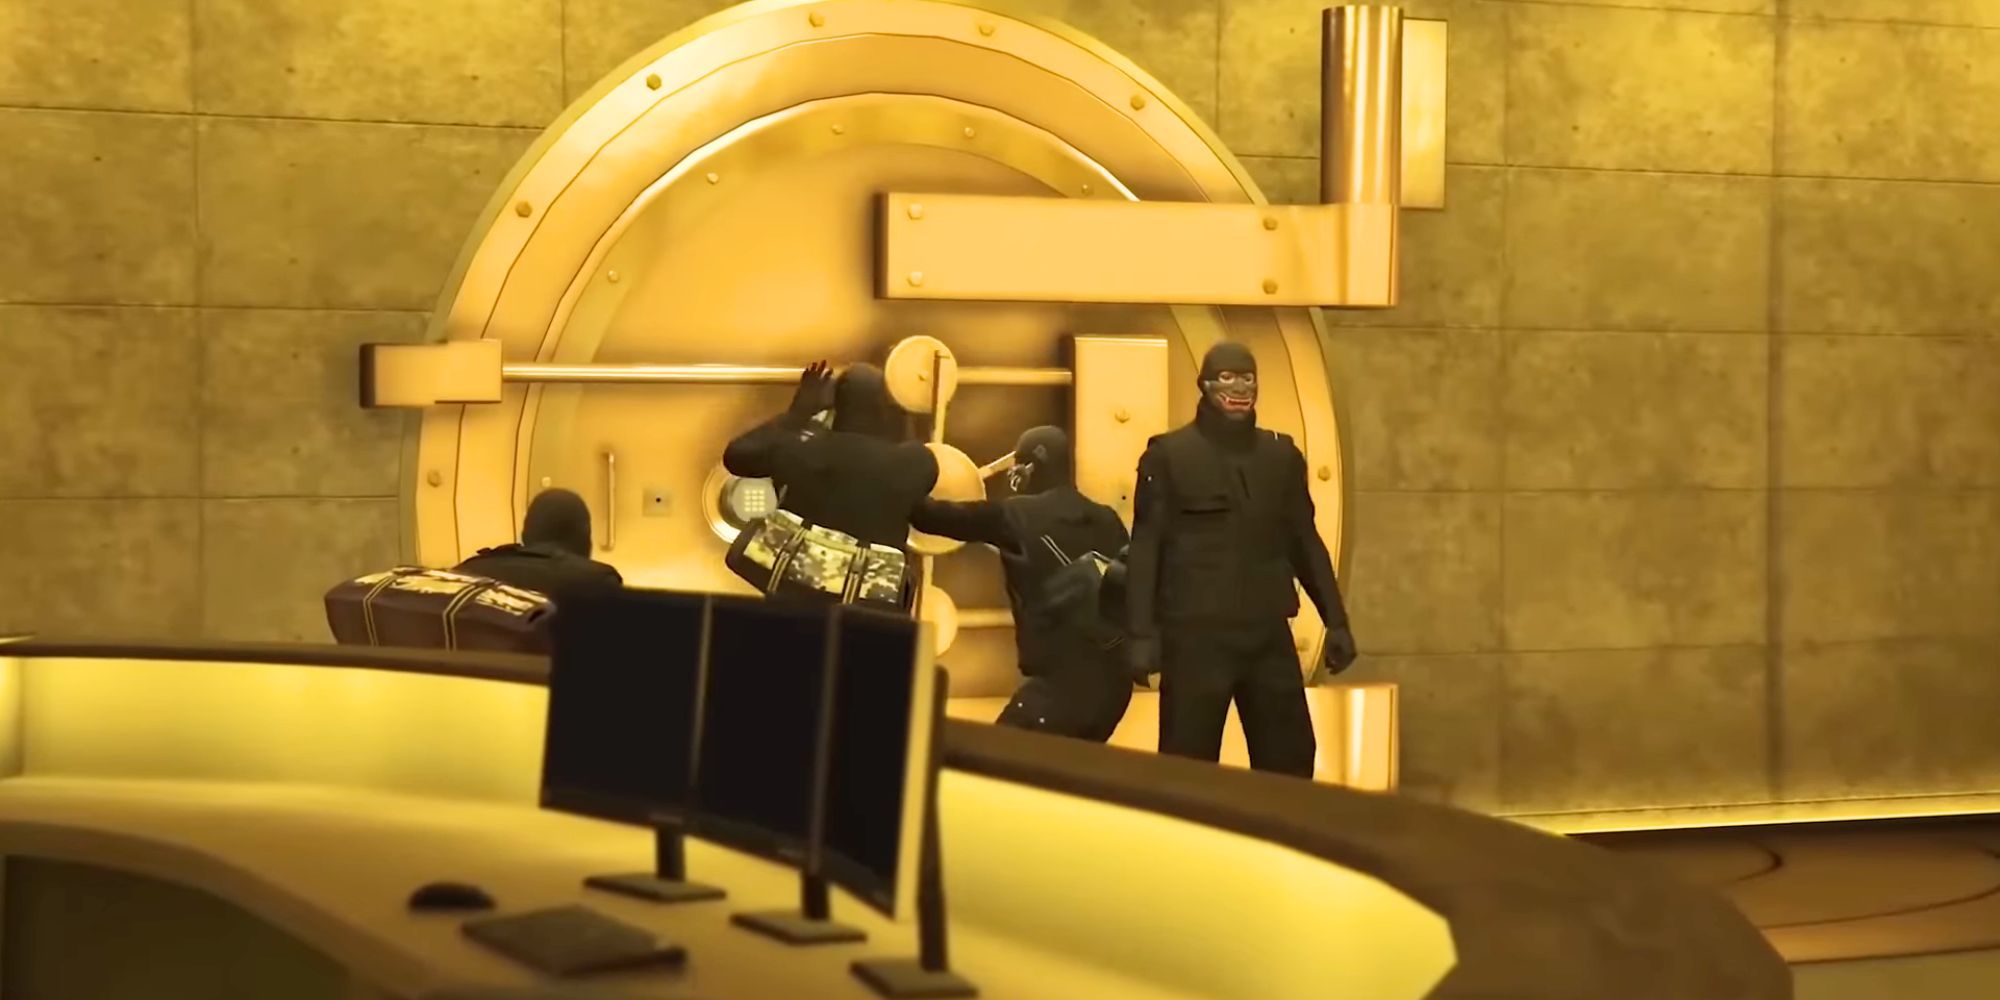 A group of four masked robbers trying to open a casino vault